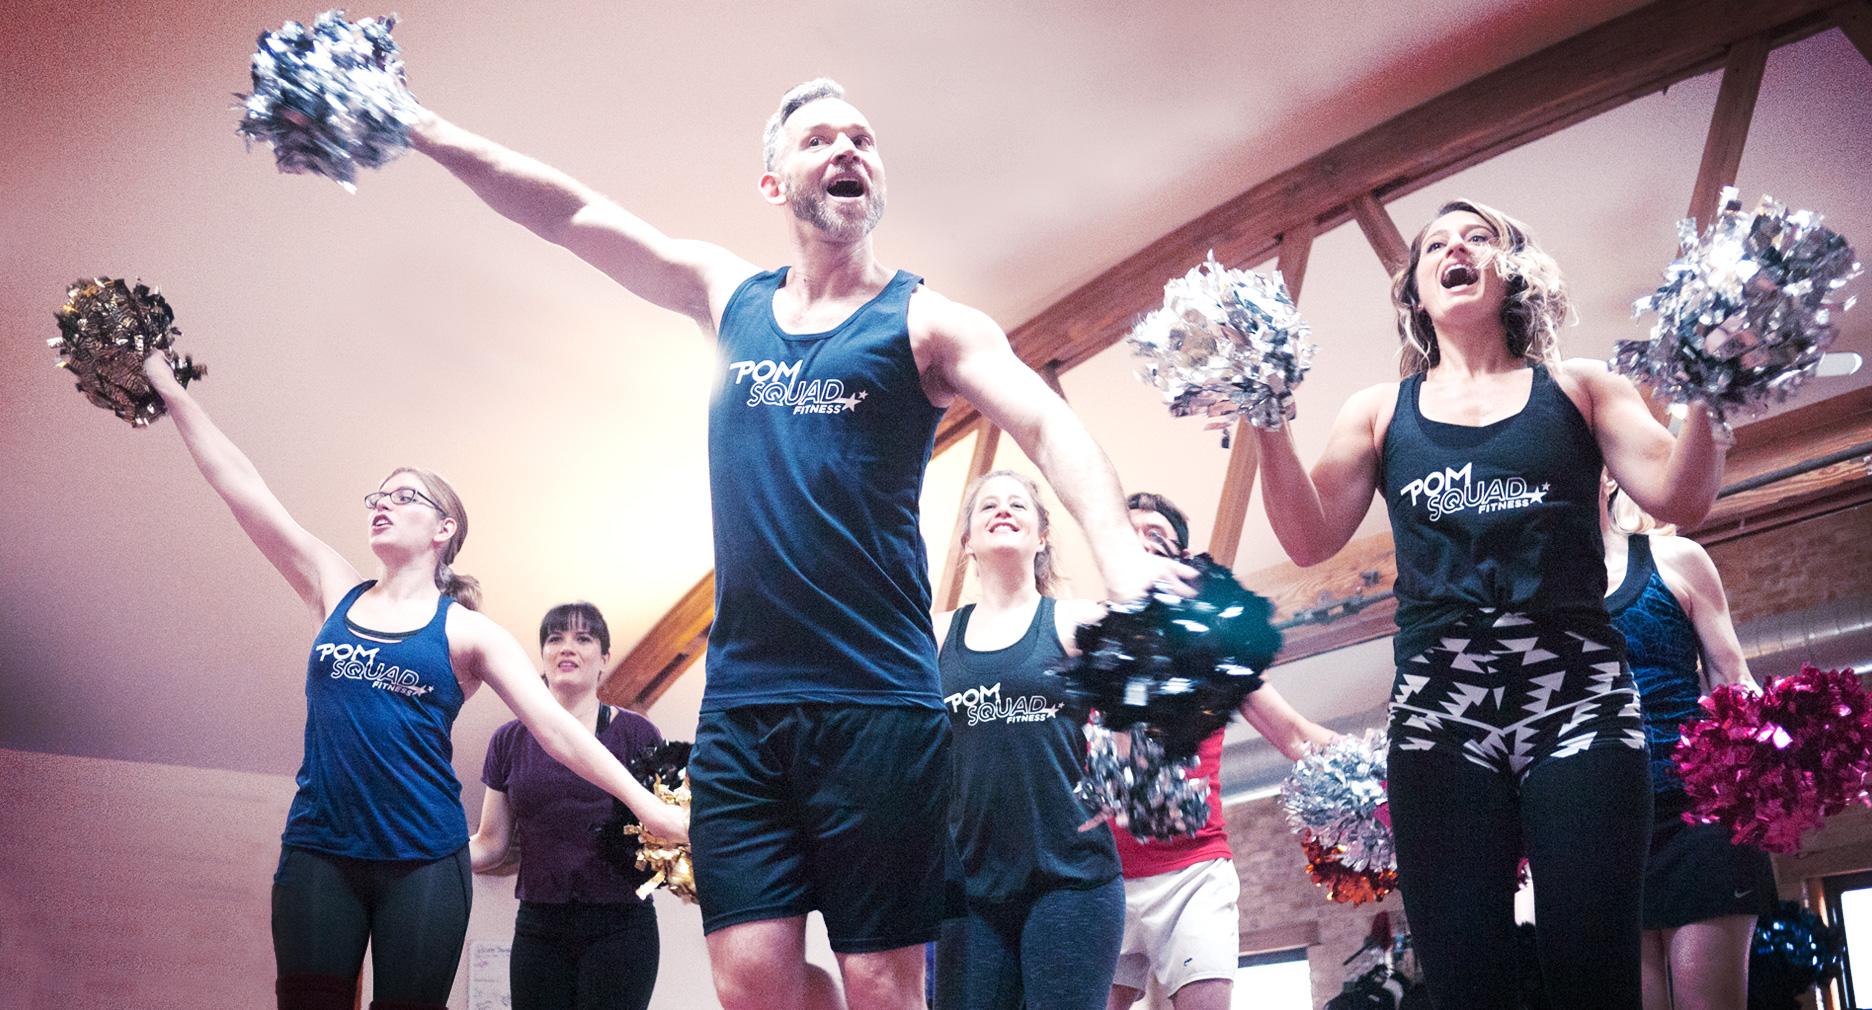  KICK, BOUNCE AND DANCE YOUR WAY TO FITNESS   ABOUT US  